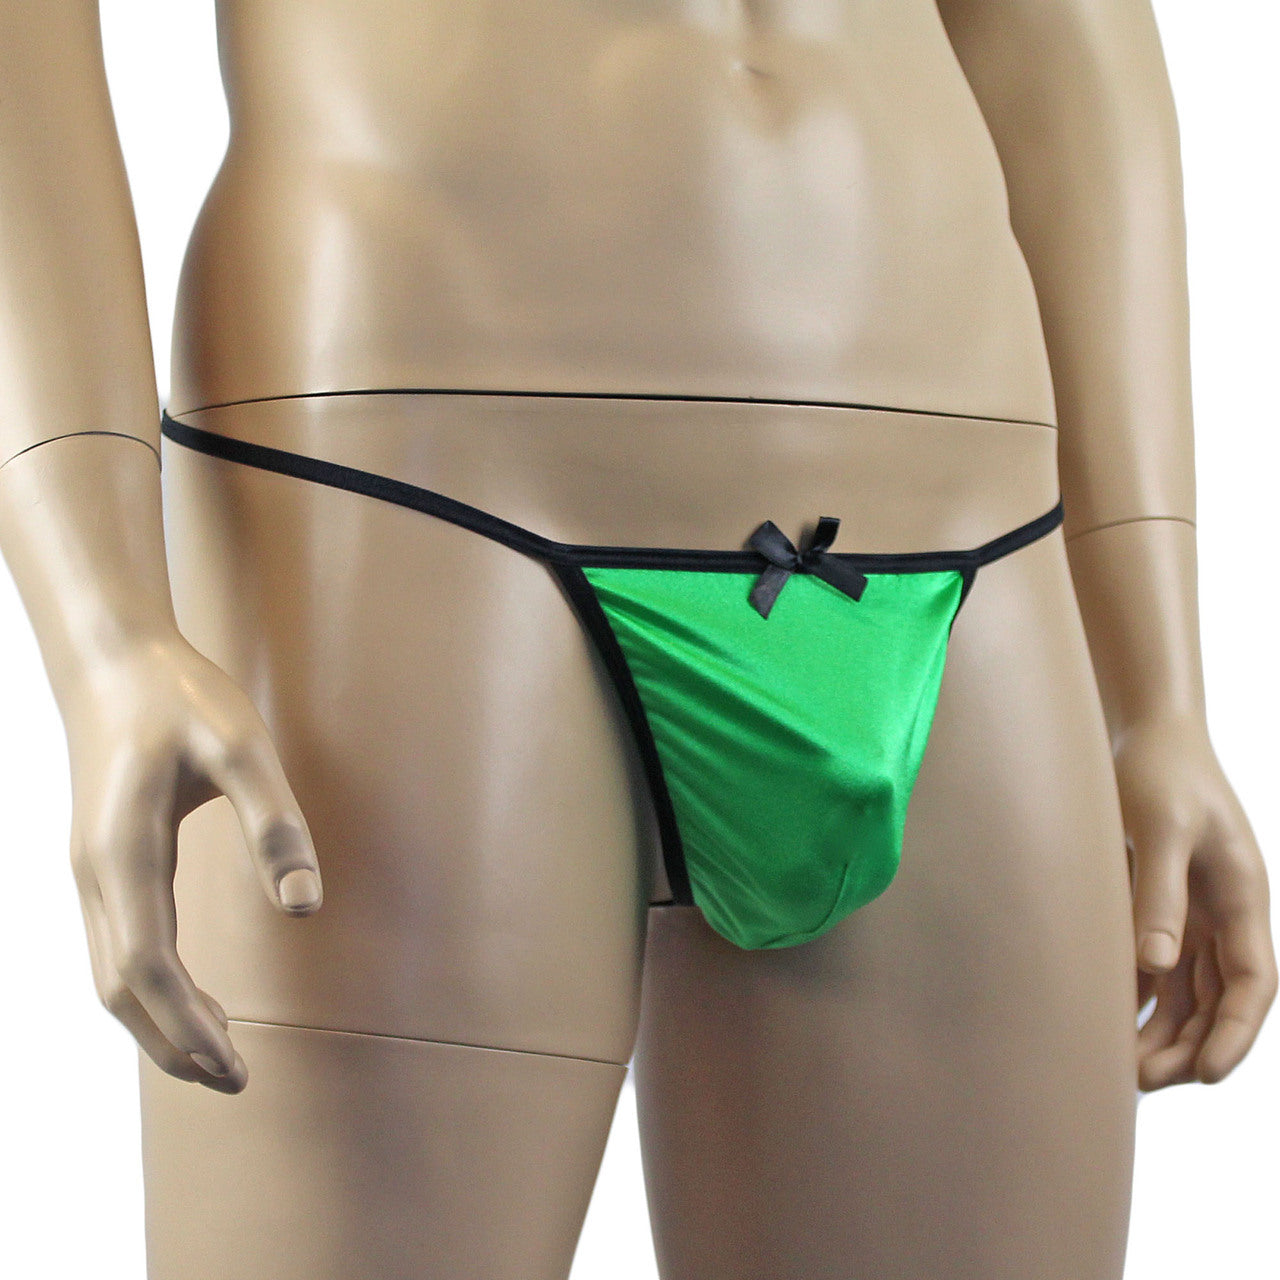 Mens Risque Stretch Satin Pouch G string with Bow Green